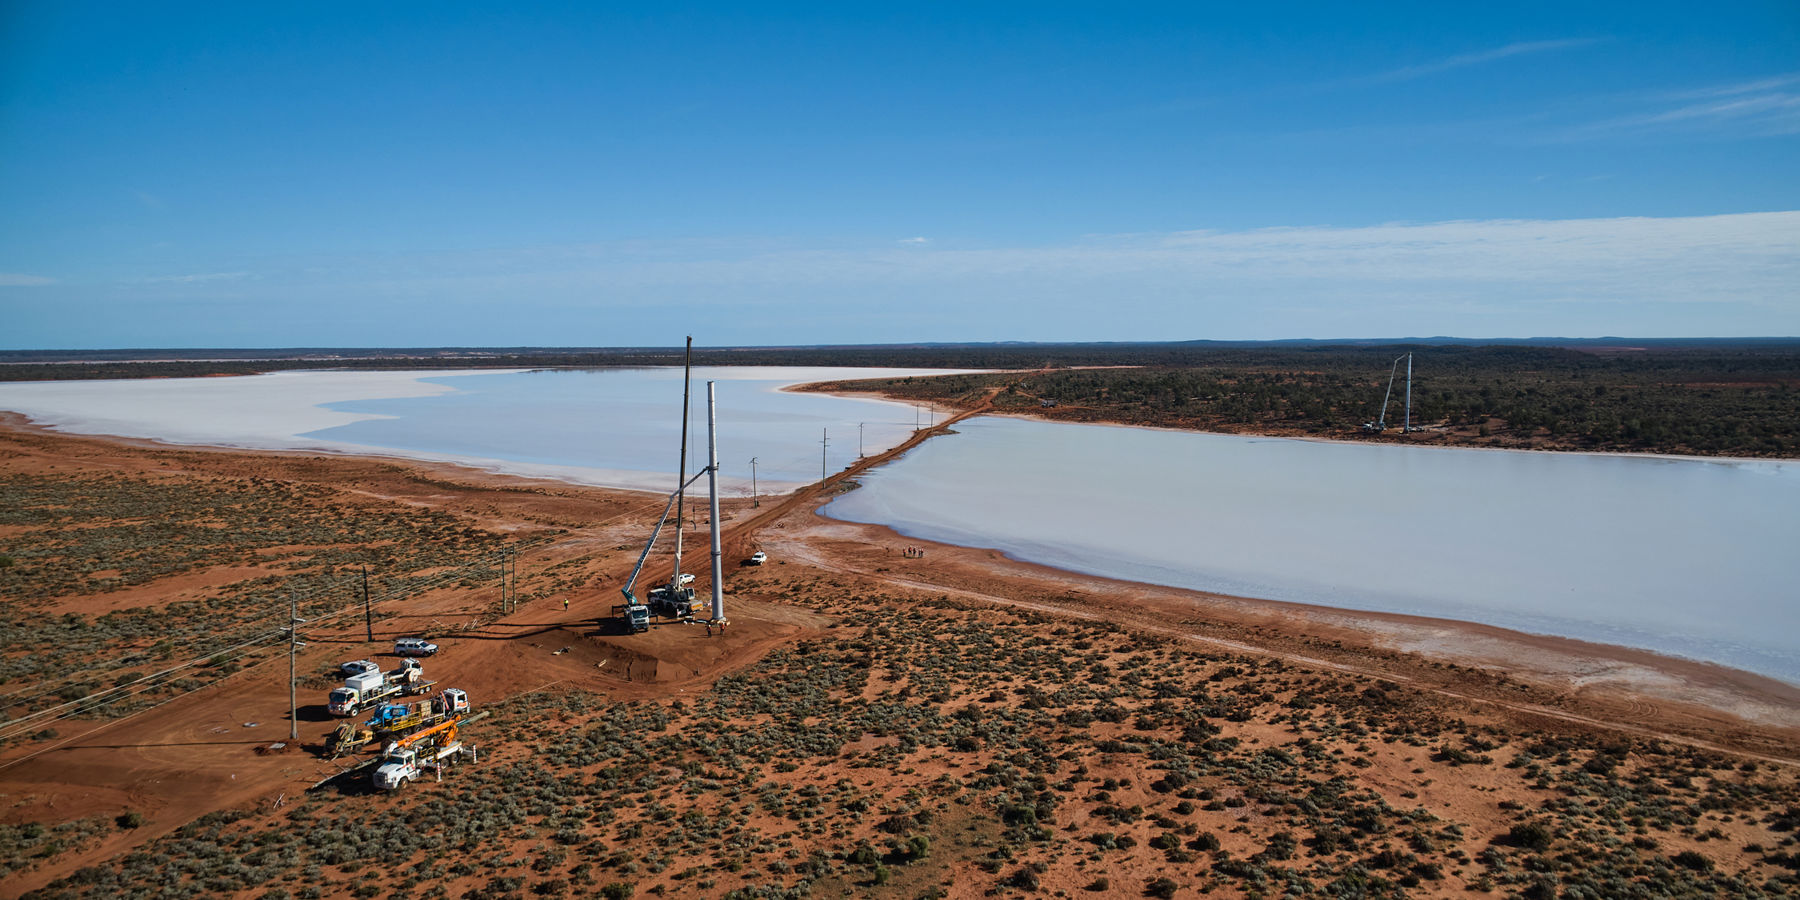 An aerial photo of transmission poles being installed in a rural setting near a body of water.